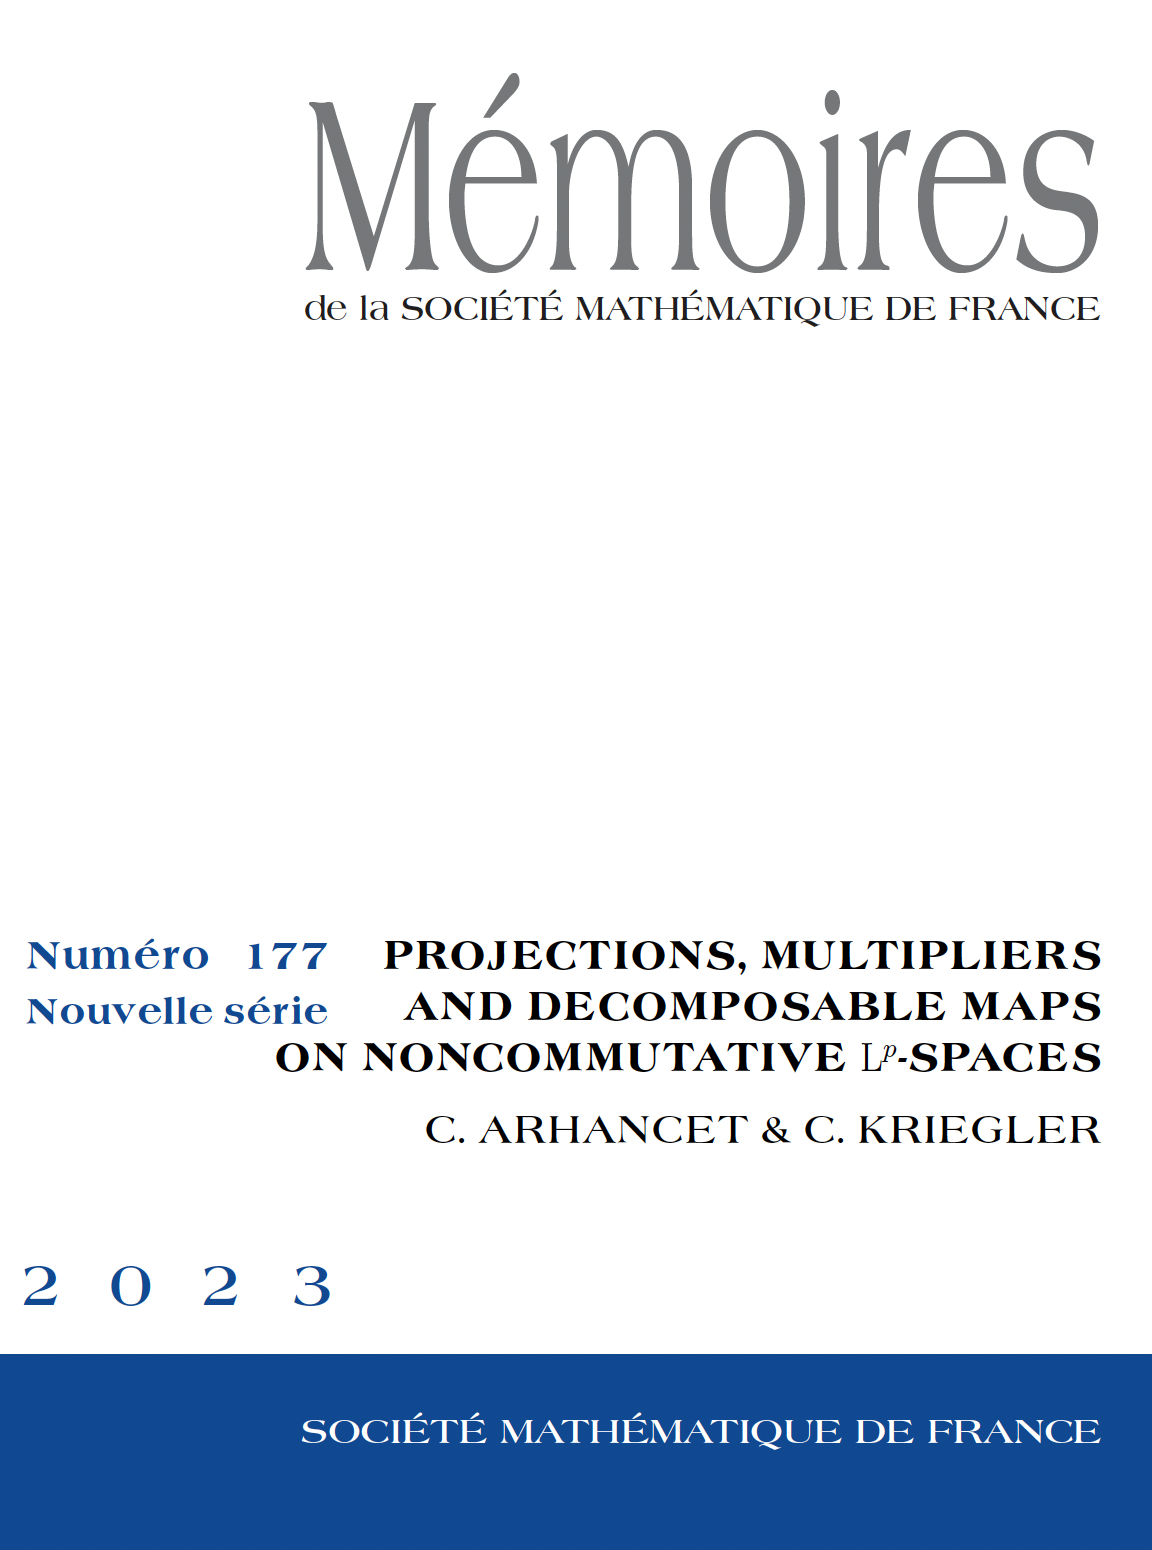 Projections, multipliers and decomposable maps on noncommutative $\mathrm{L}^p$-spaces